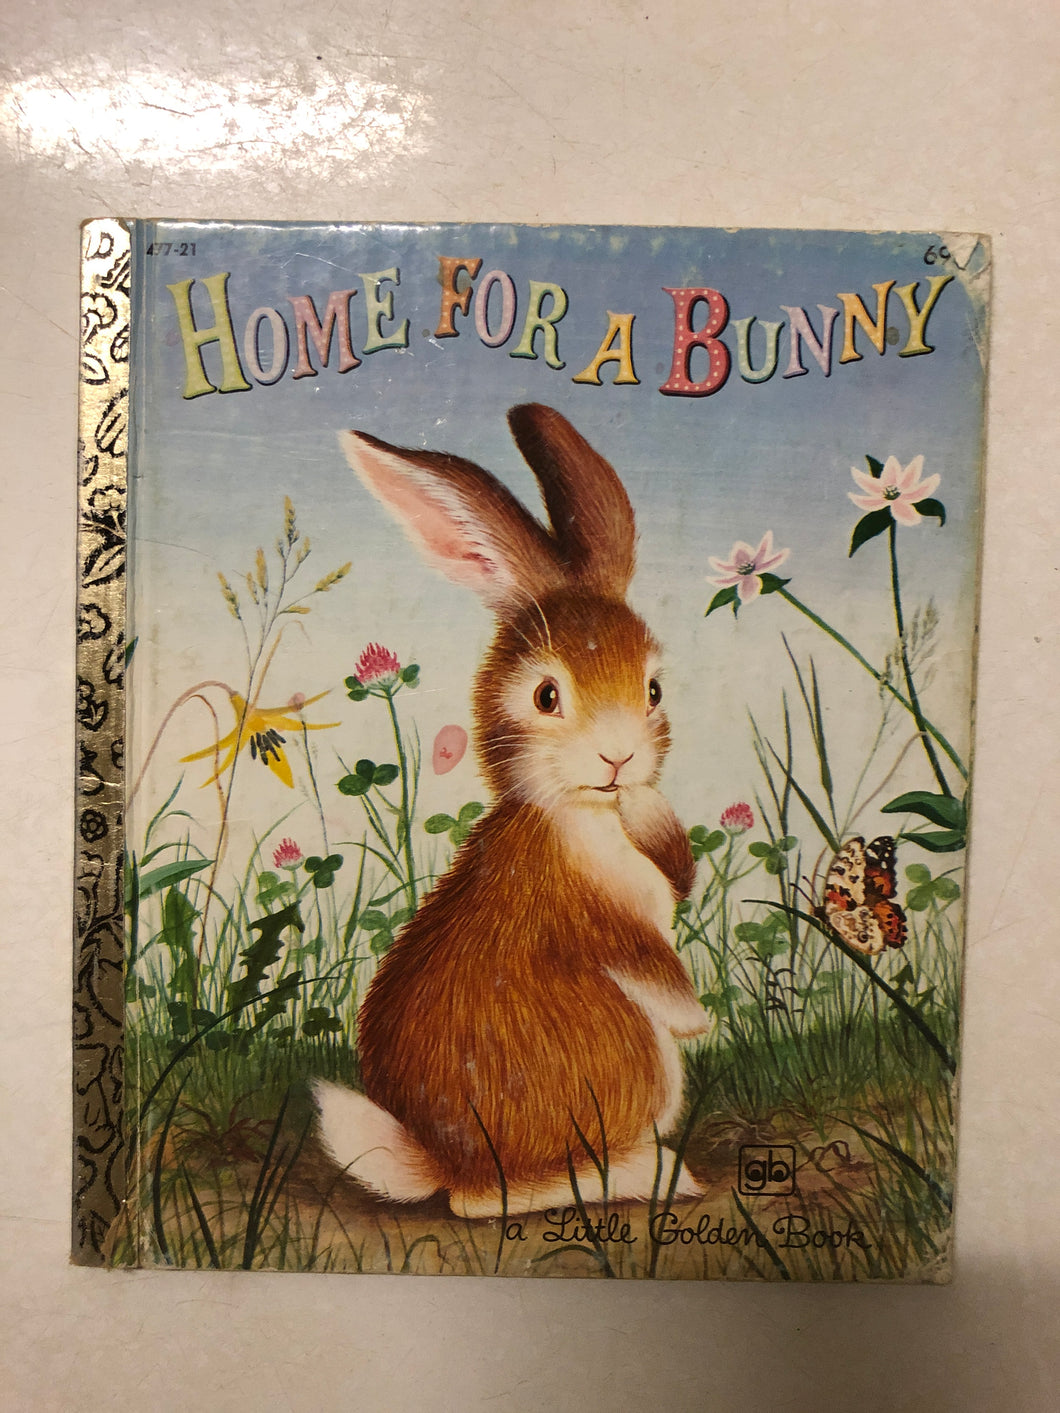 Home For a Bunny - Slick Cat Books 